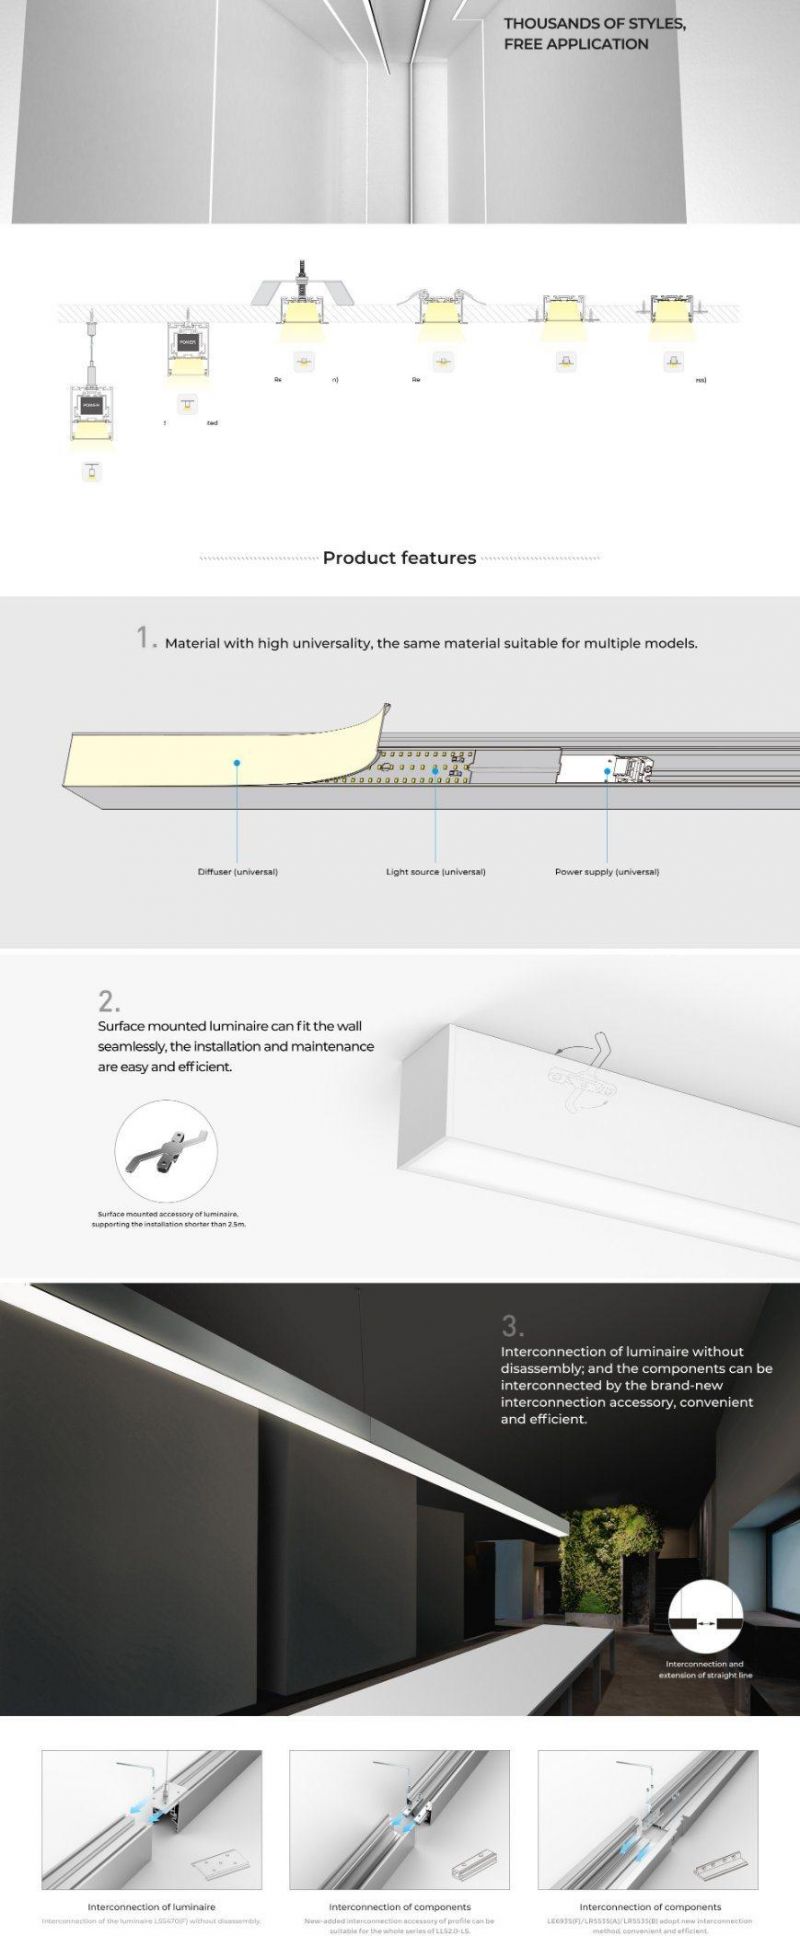 Mounted and Pendant Linkable DOT Free LED Linear Light for Office, Home, Shops, Decorative Site Linear Lighting